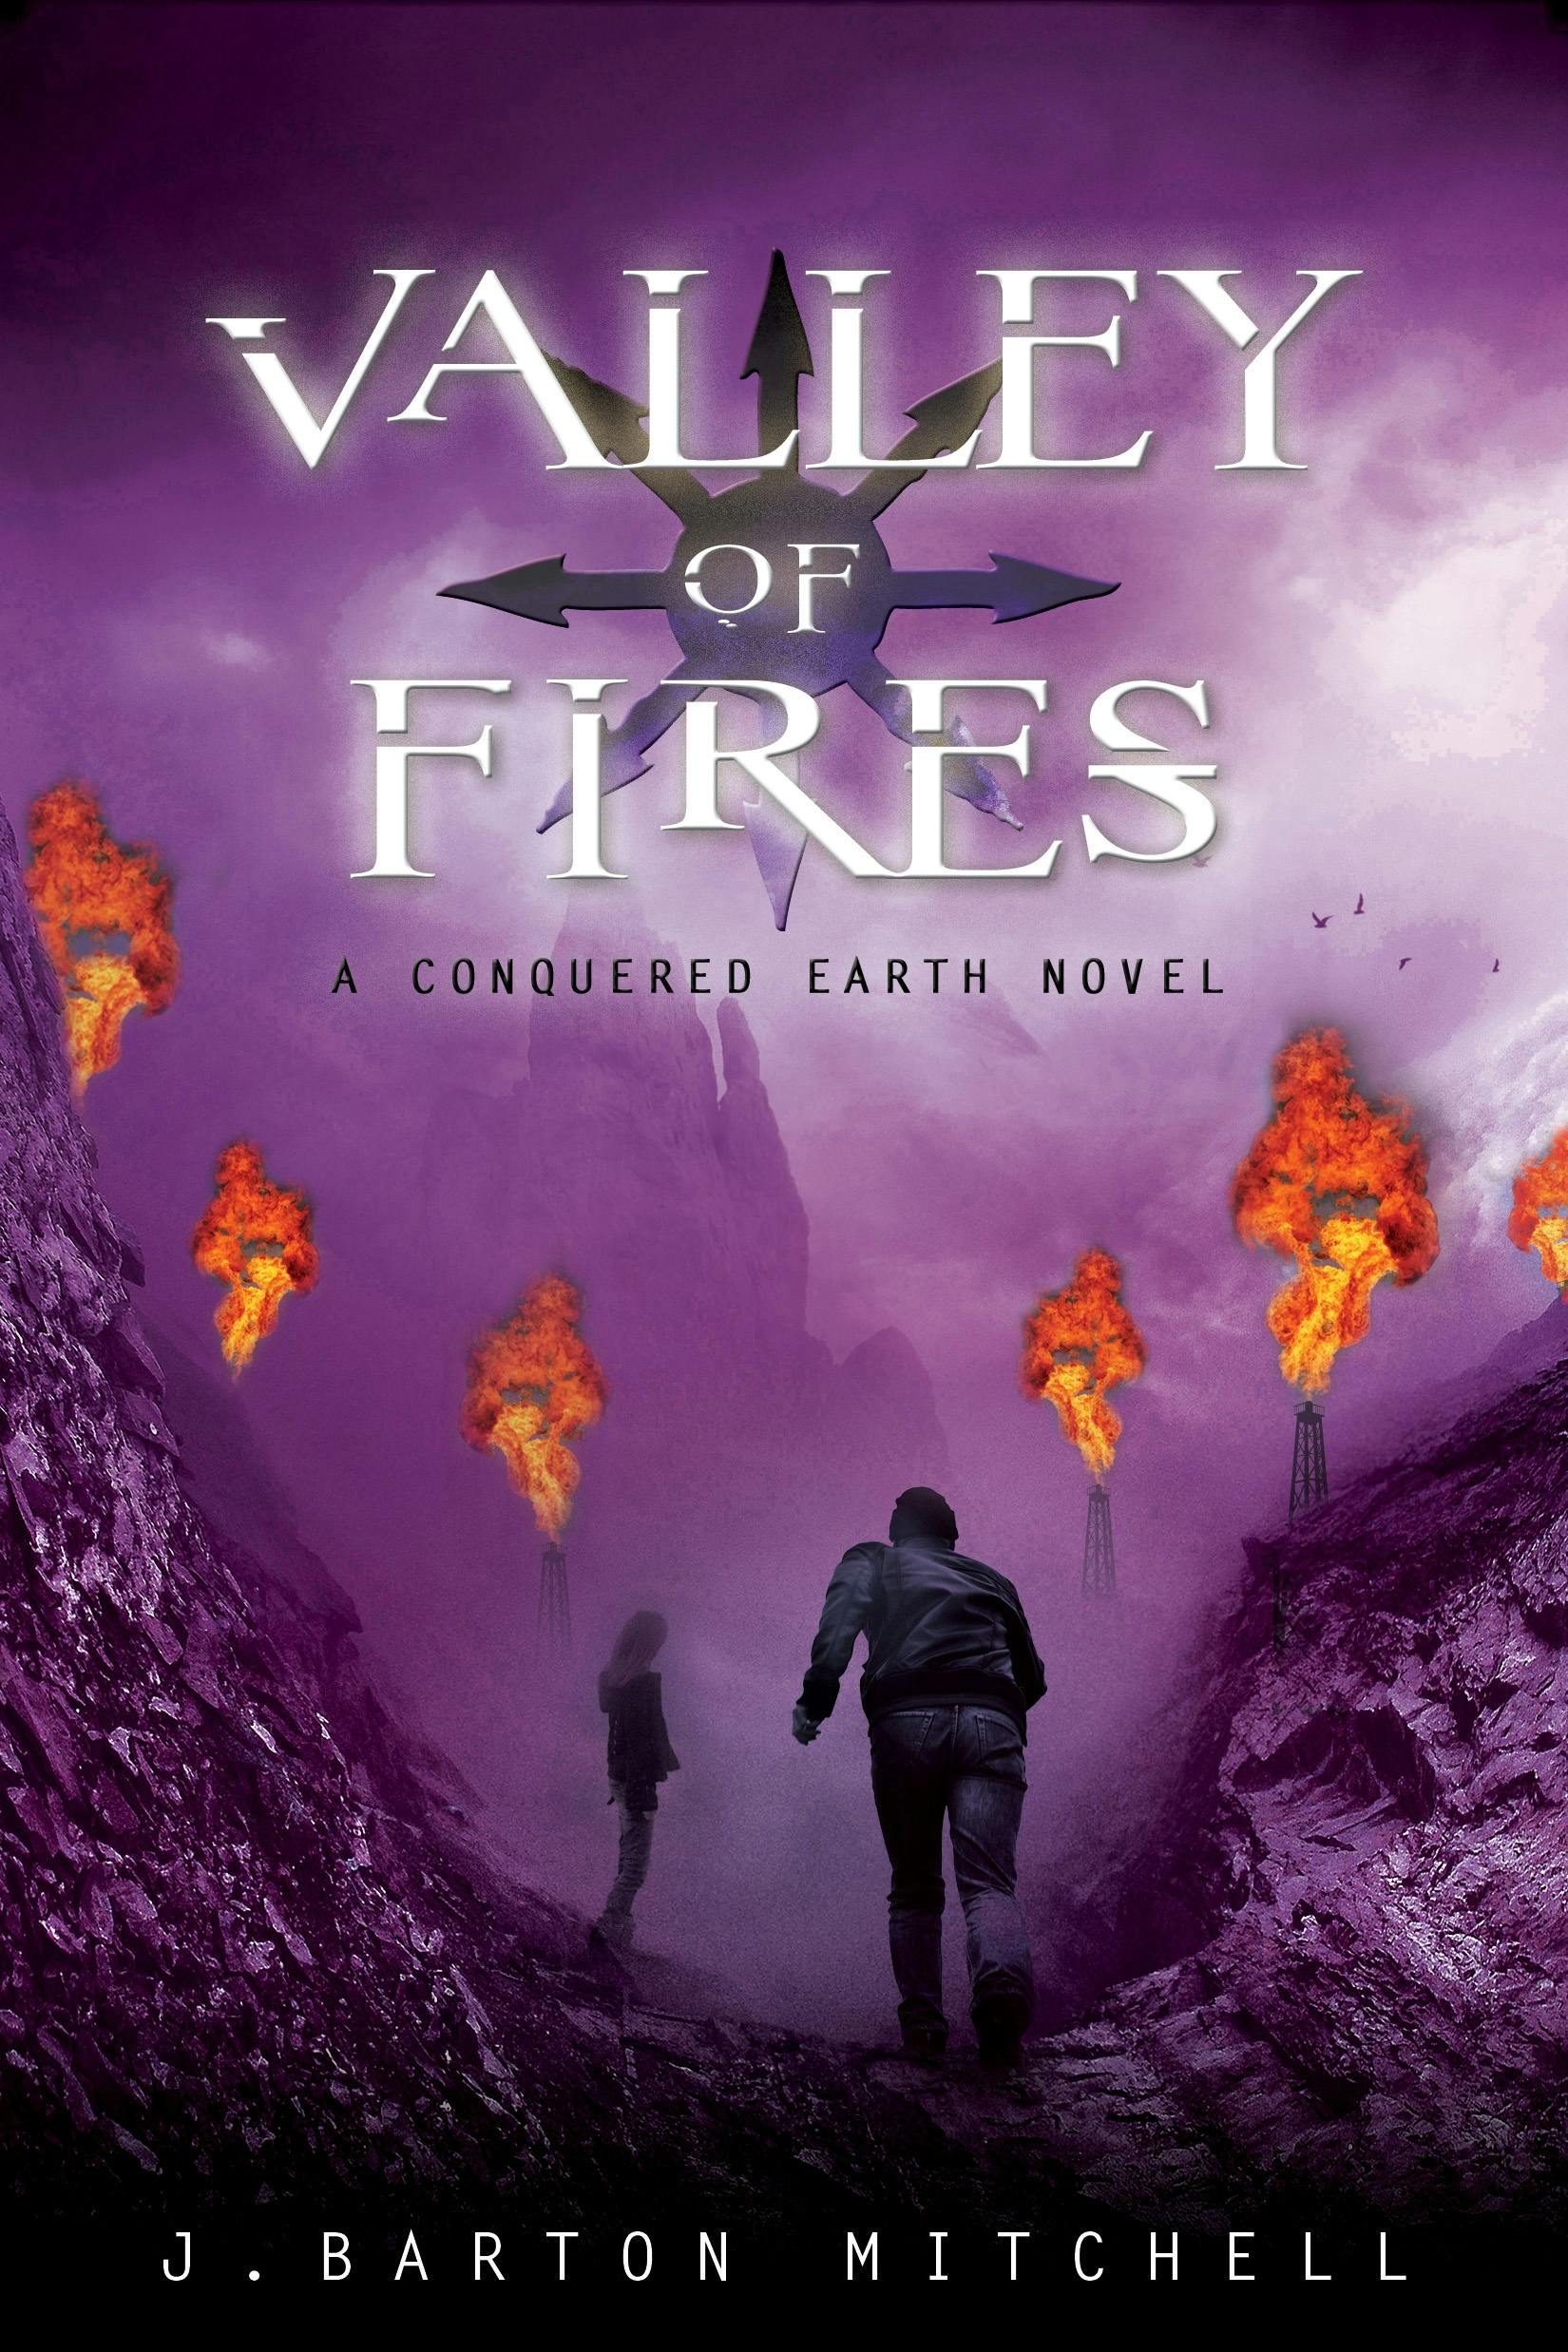 Image of Valley of Fires